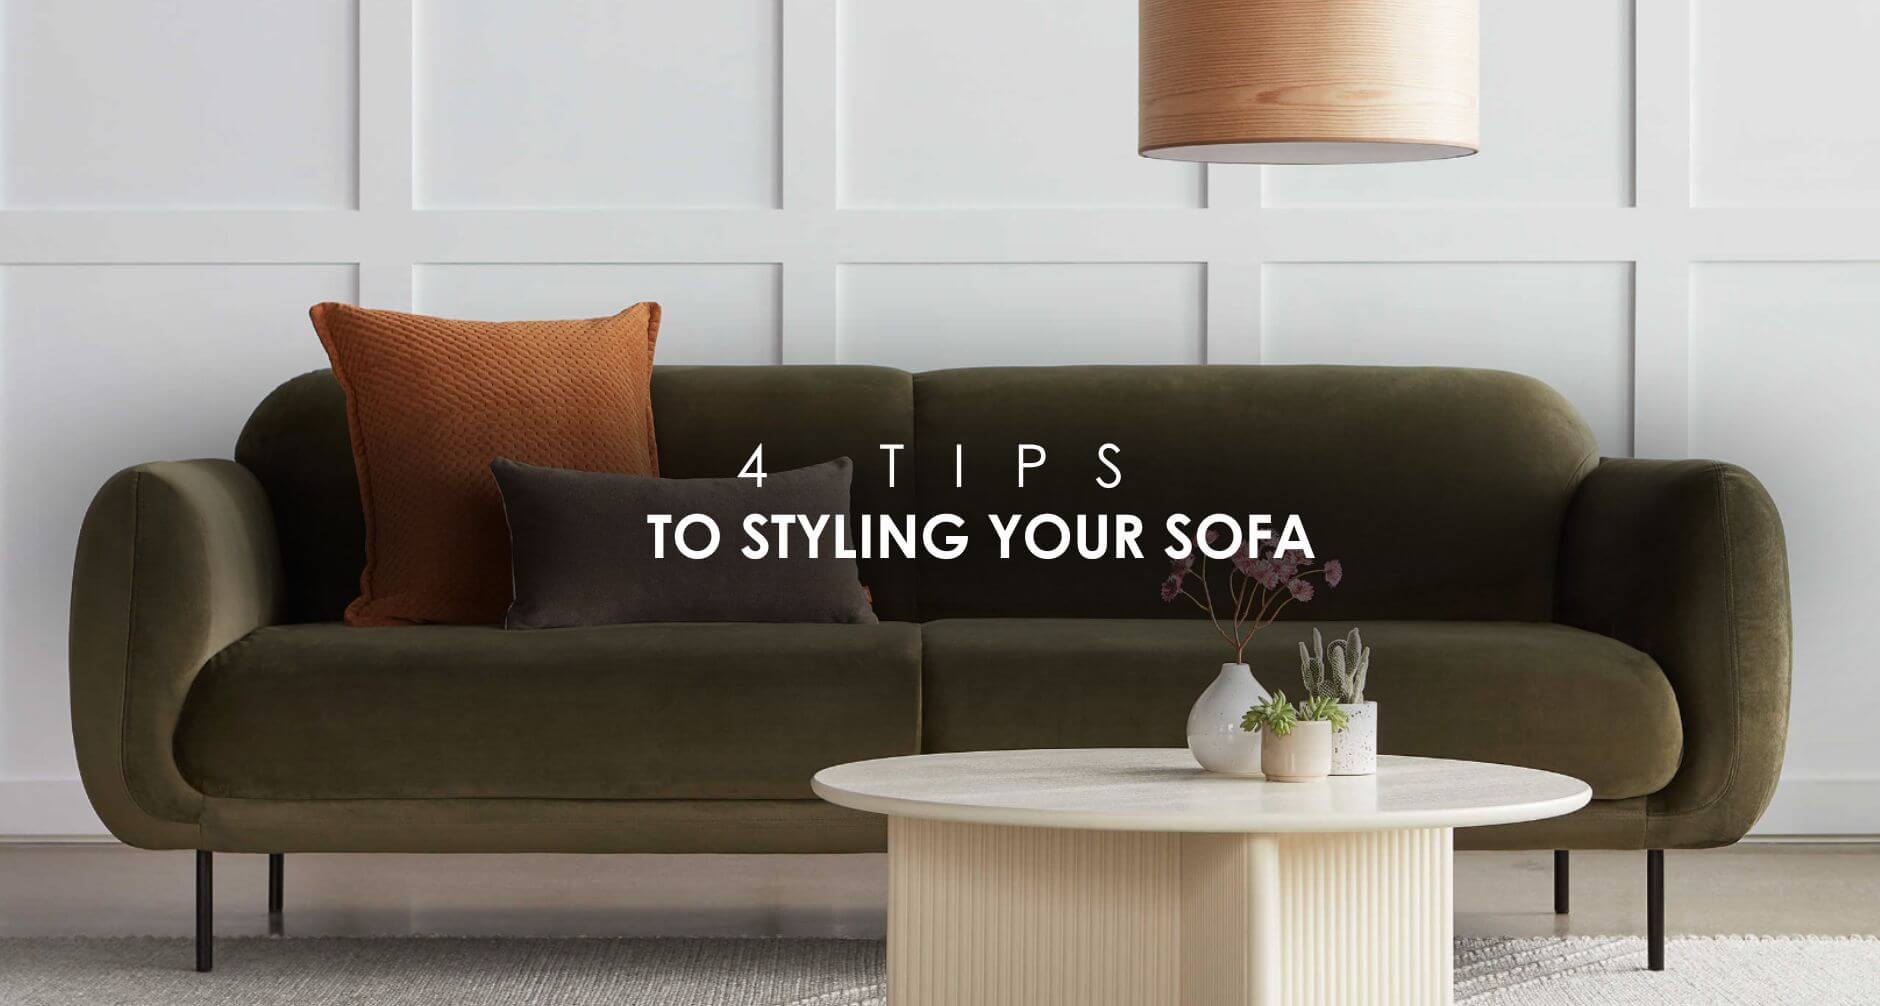 Discover the art of sofa styling: prioritize comfort, create conversation zones, add functional tables, and complete with cozy accessories.